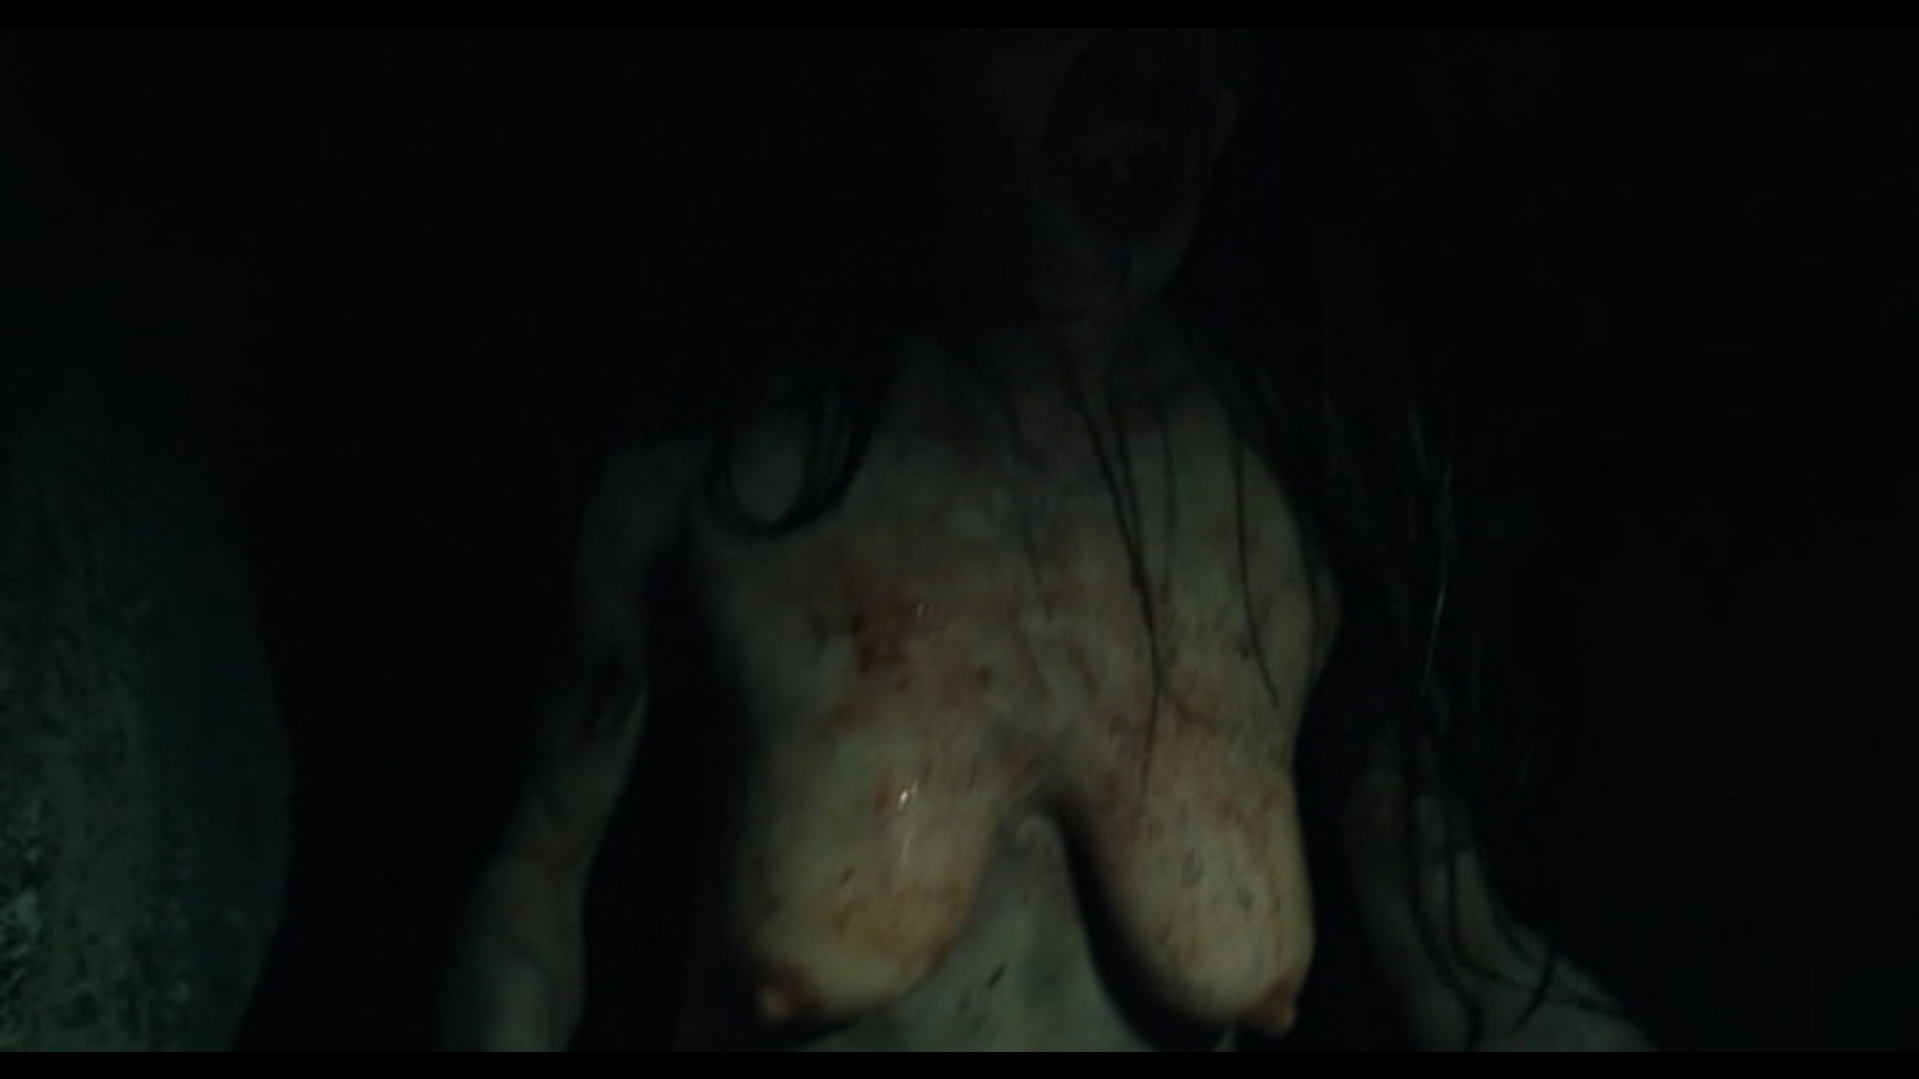 Boobs in the movie Barbarian (2022) - NSFW, Boobs, Movies, Horror, Thriller, 2022, Longpost